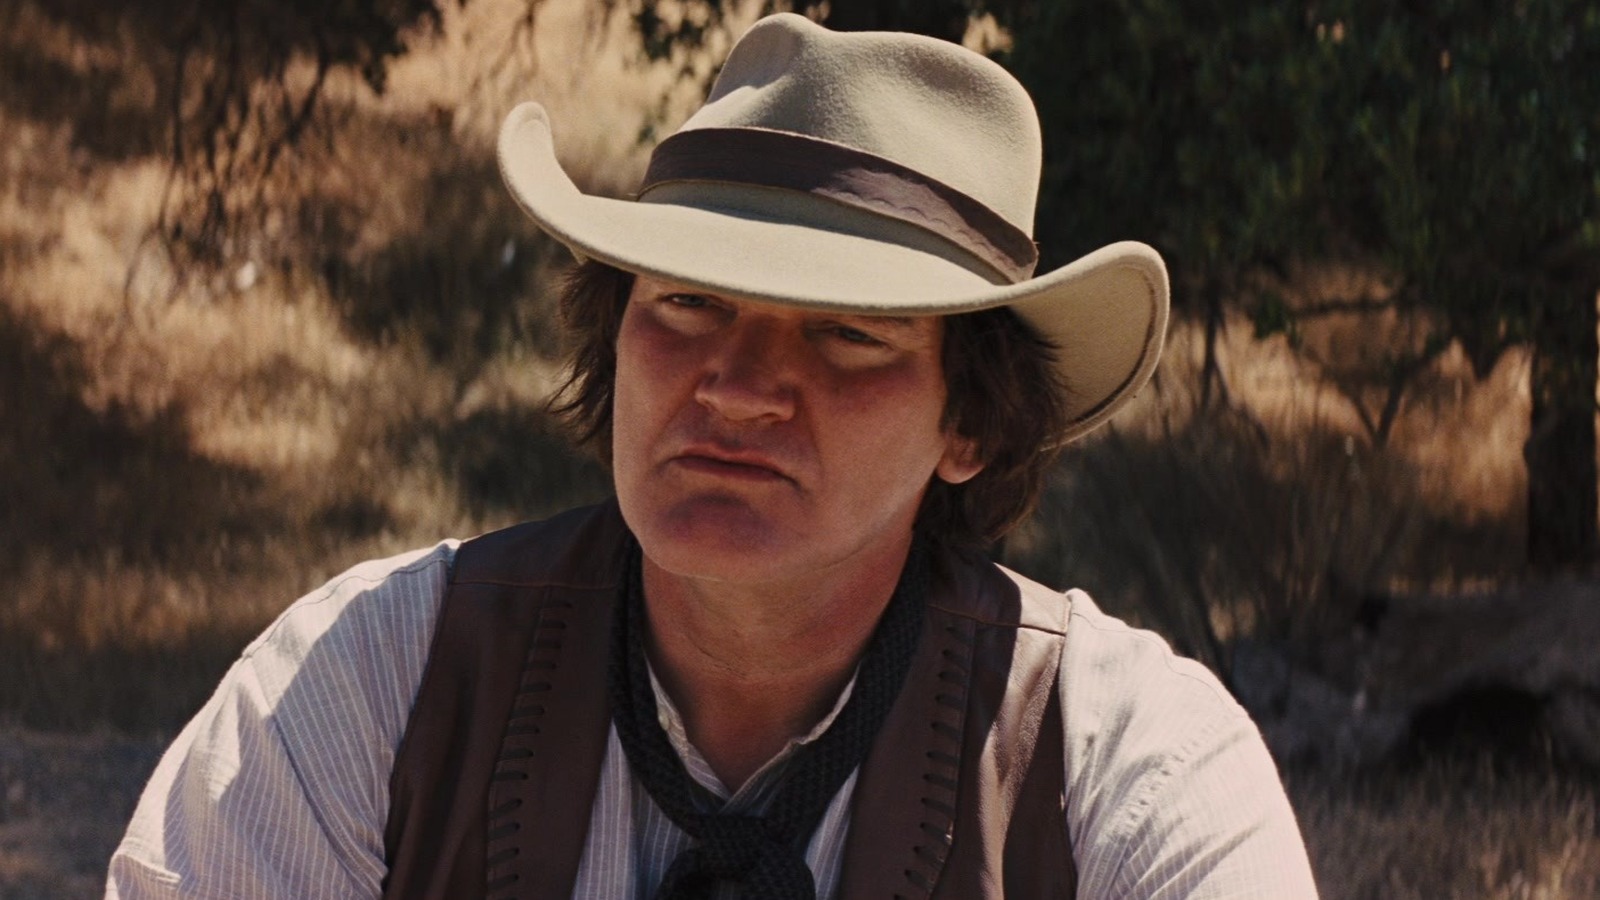 #There’s Just One Subject Quentin Tarantino Thinks Should Never Be Shown On Film